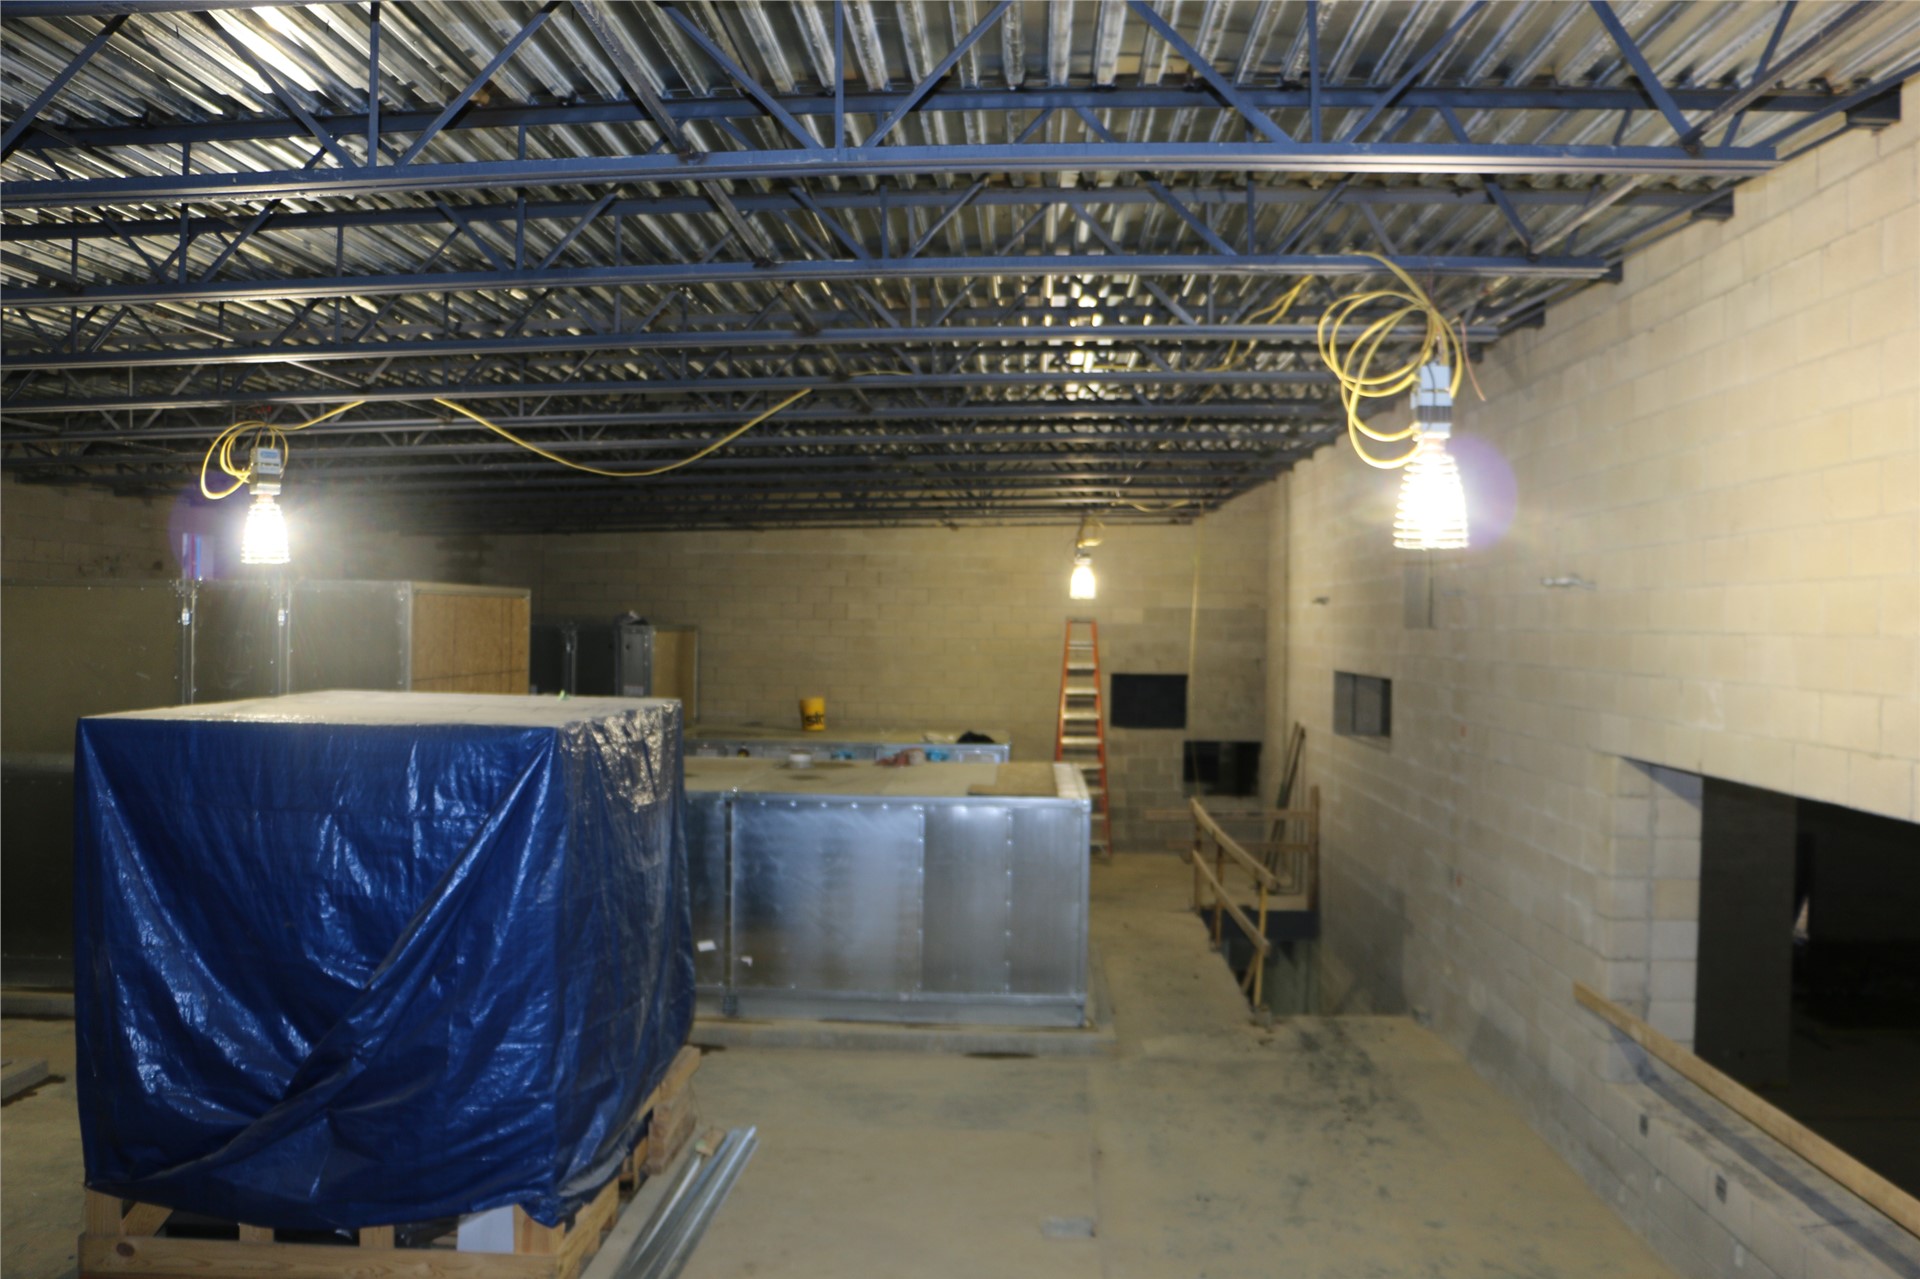 HVAC units on the second floor of the athletic wing (beside gymnasium), Press box window seen to rig